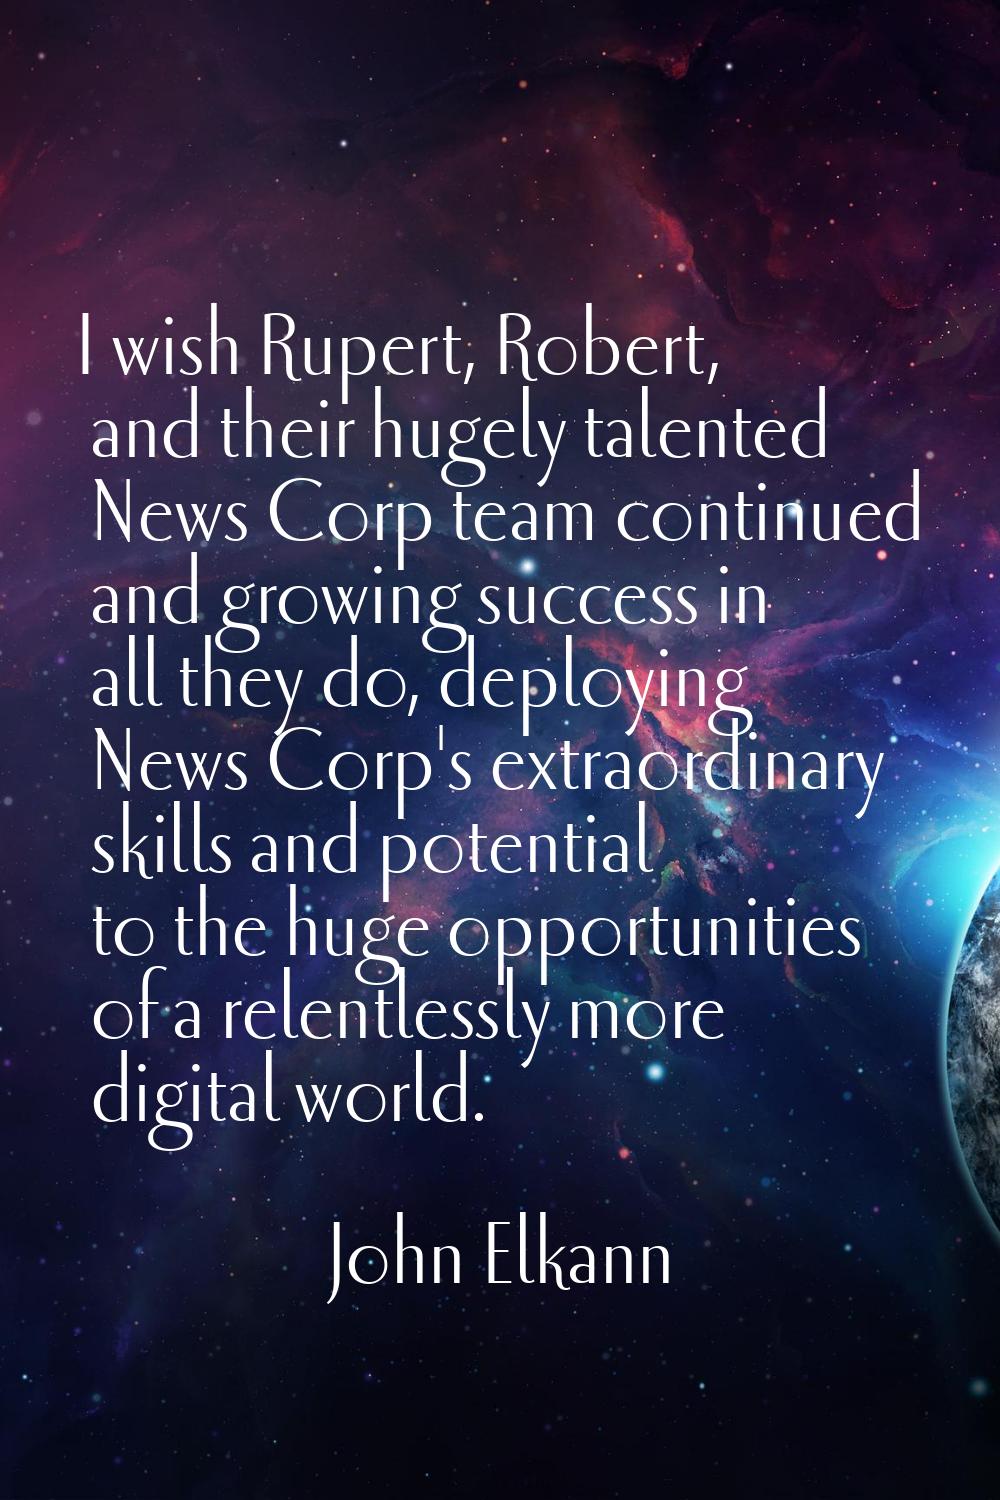 I wish Rupert, Robert, and their hugely talented News Corp team continued and growing success in al